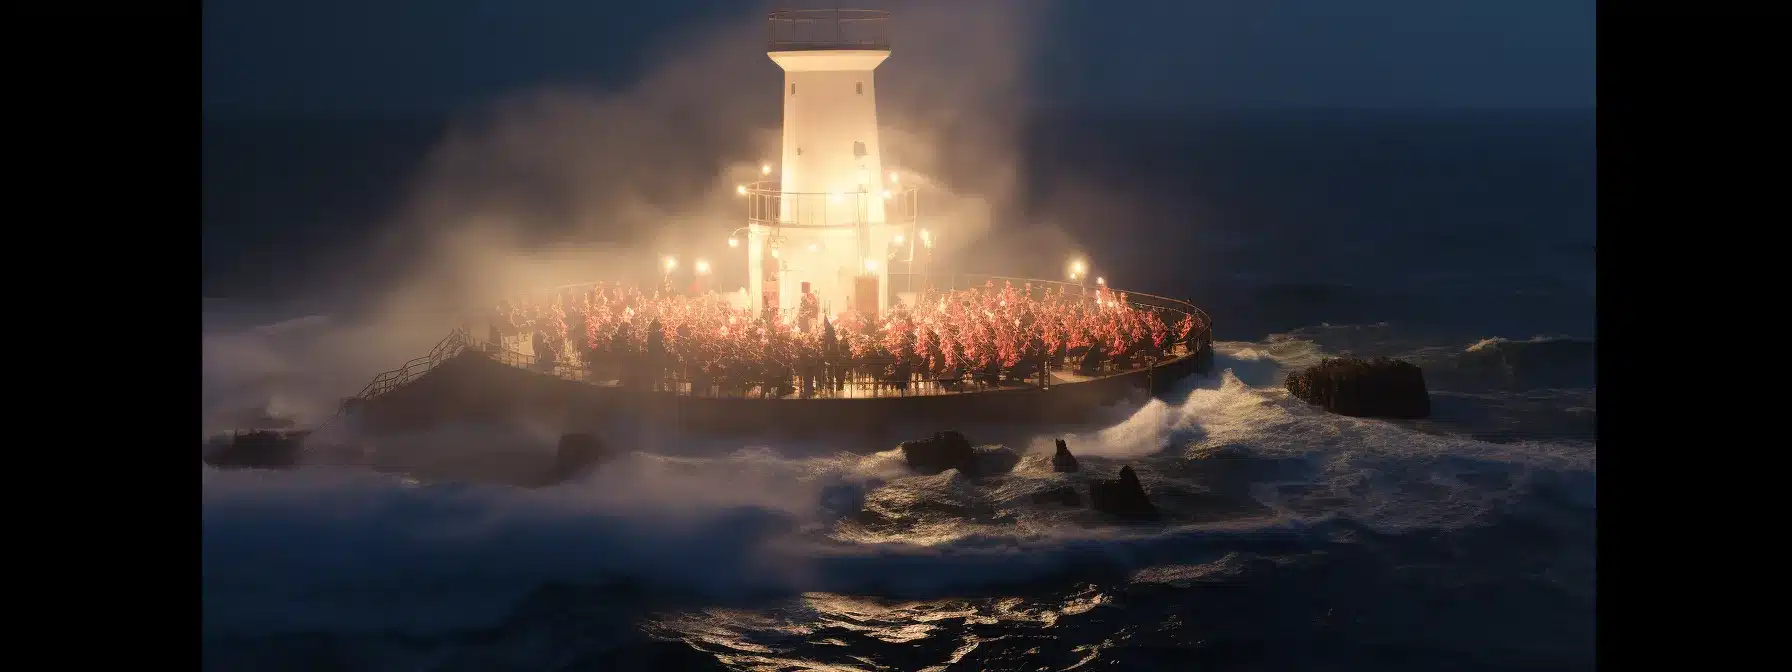 A Lighthouse Beacon Illuminating A Chaotic Sea While A Symphony Orchestra Plays In The Background.